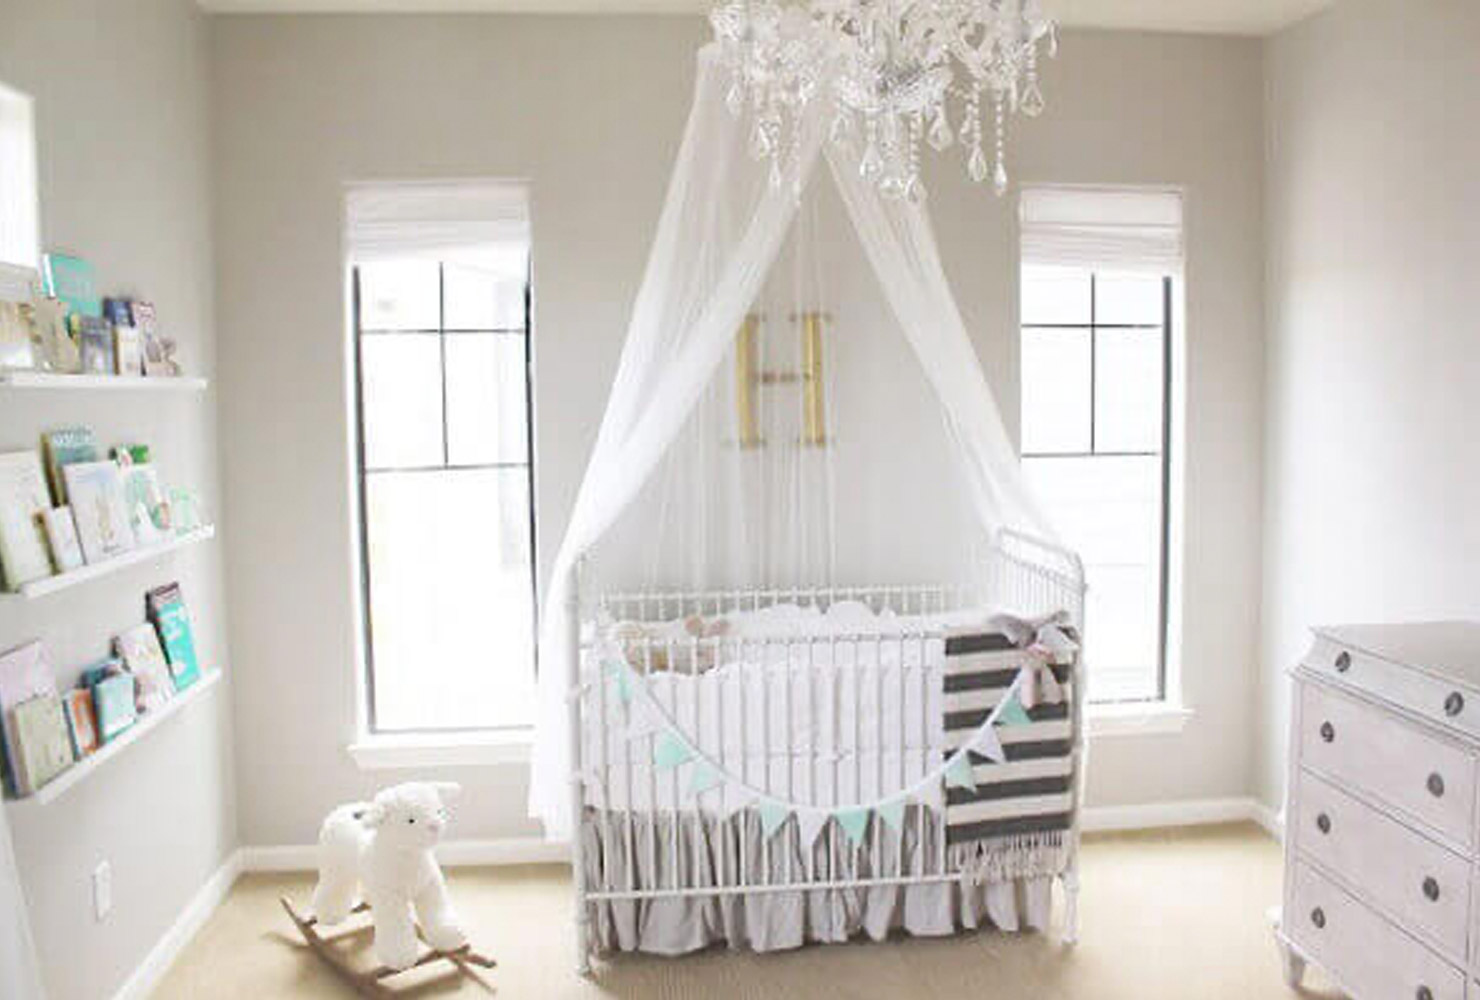 Gray and blue nursery with canopy over crib.